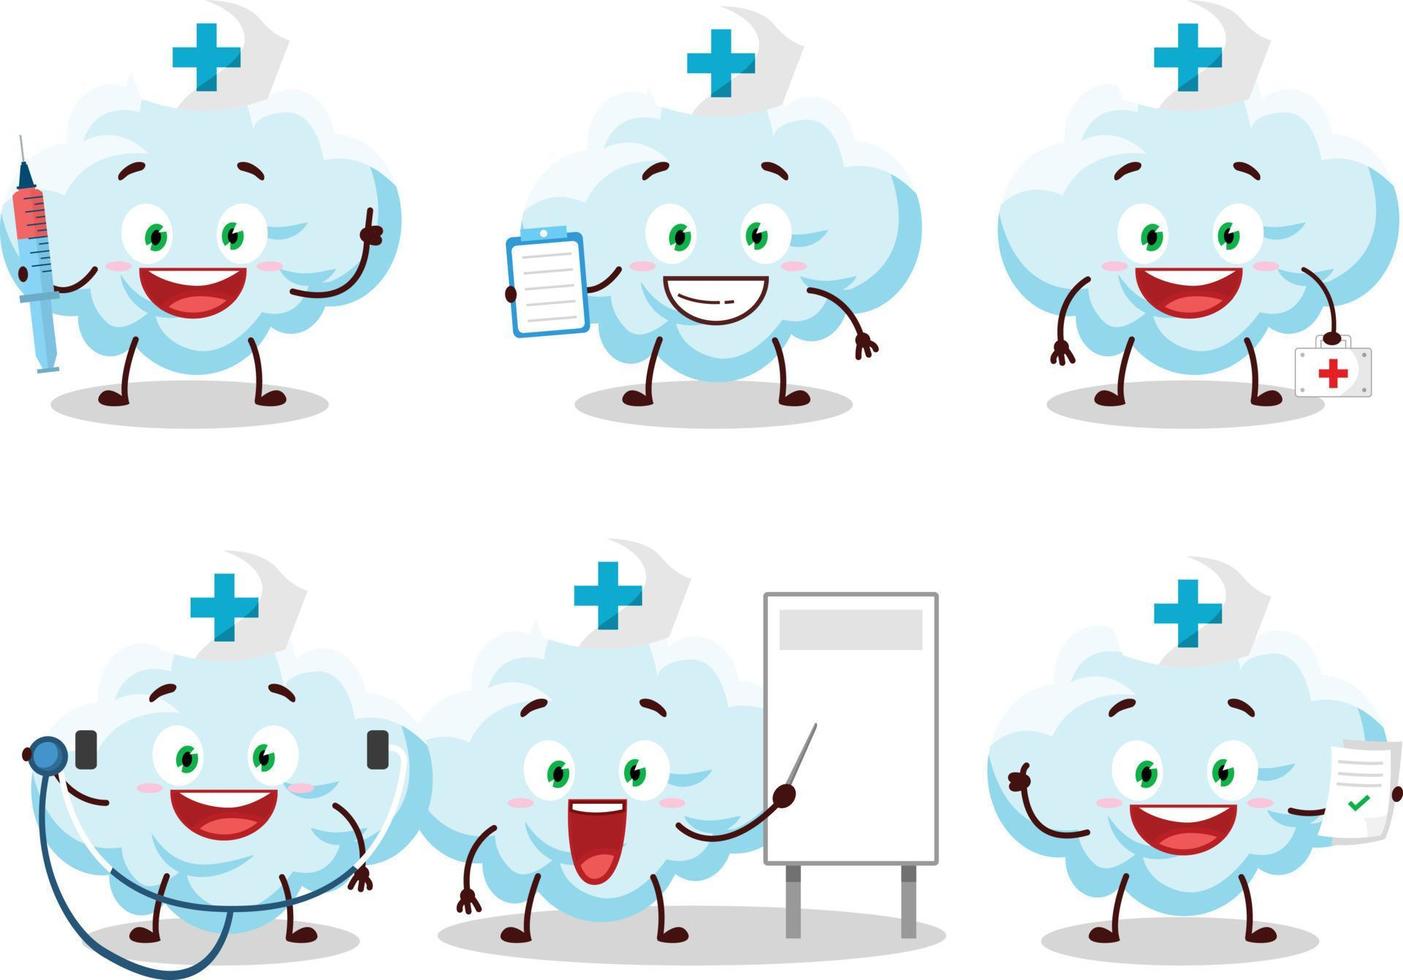 Doctor profession emoticon with cloud cartoon character vector